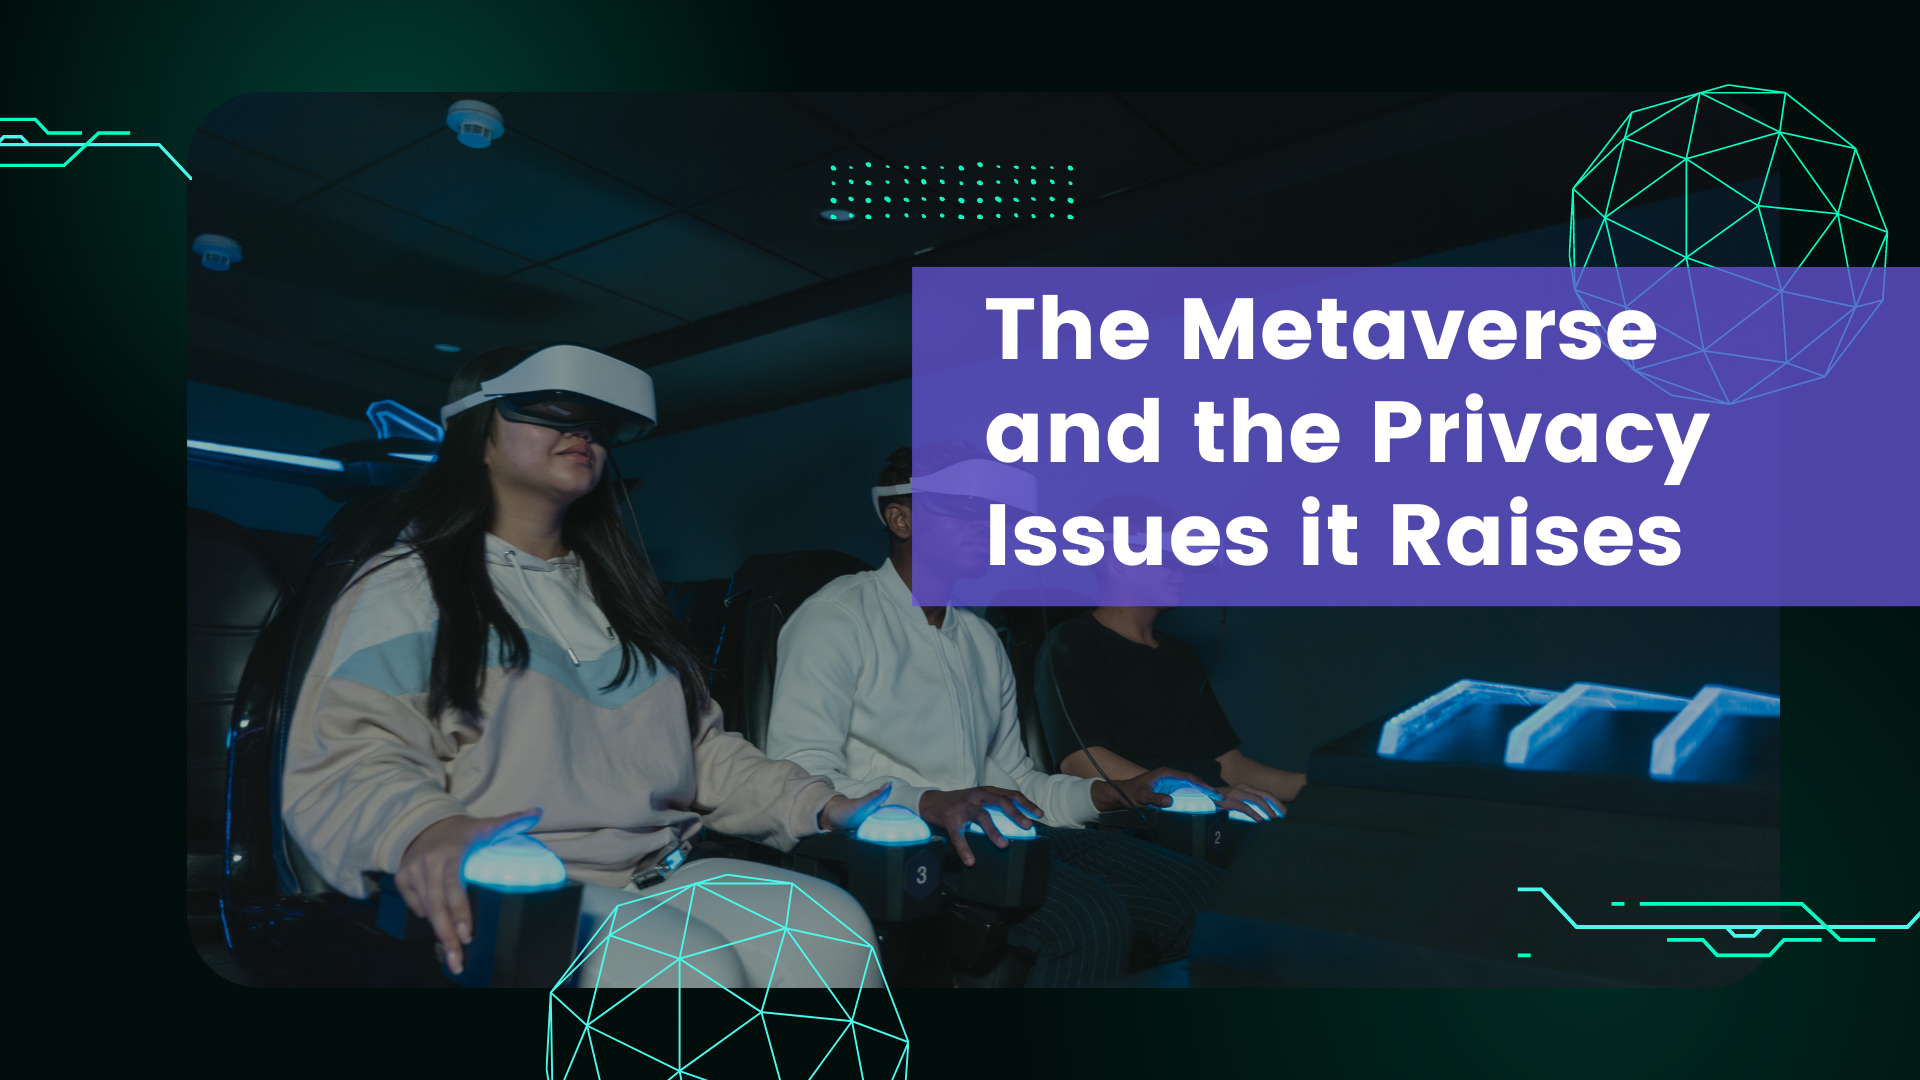 The metaverse and the privacy issues it raises	